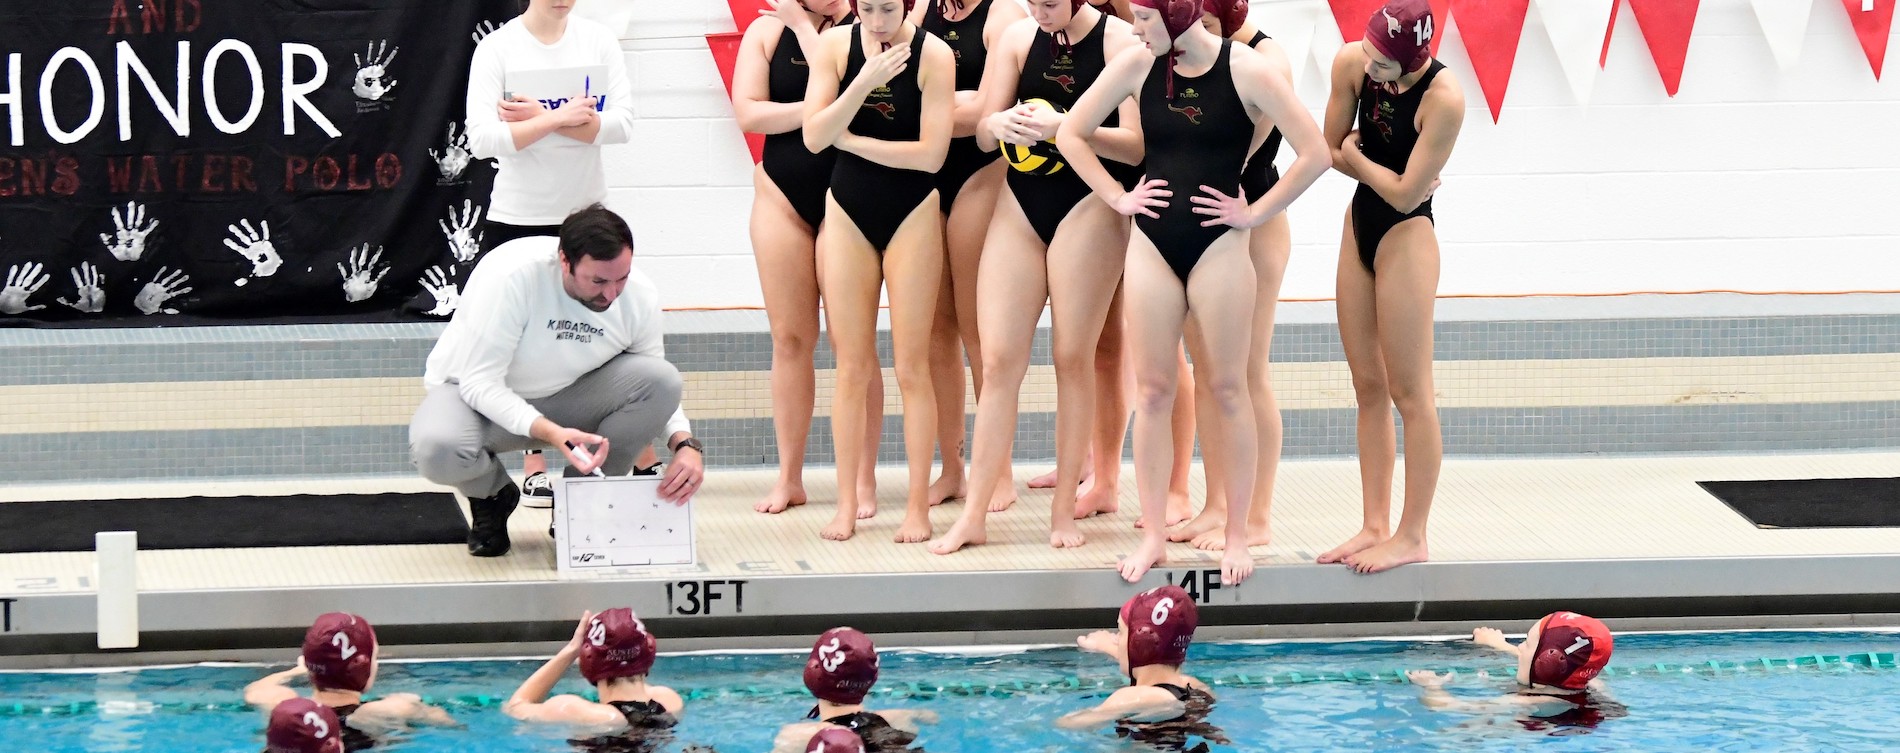 'Roo Women's Water Polo Set for Inaugural National Tournament